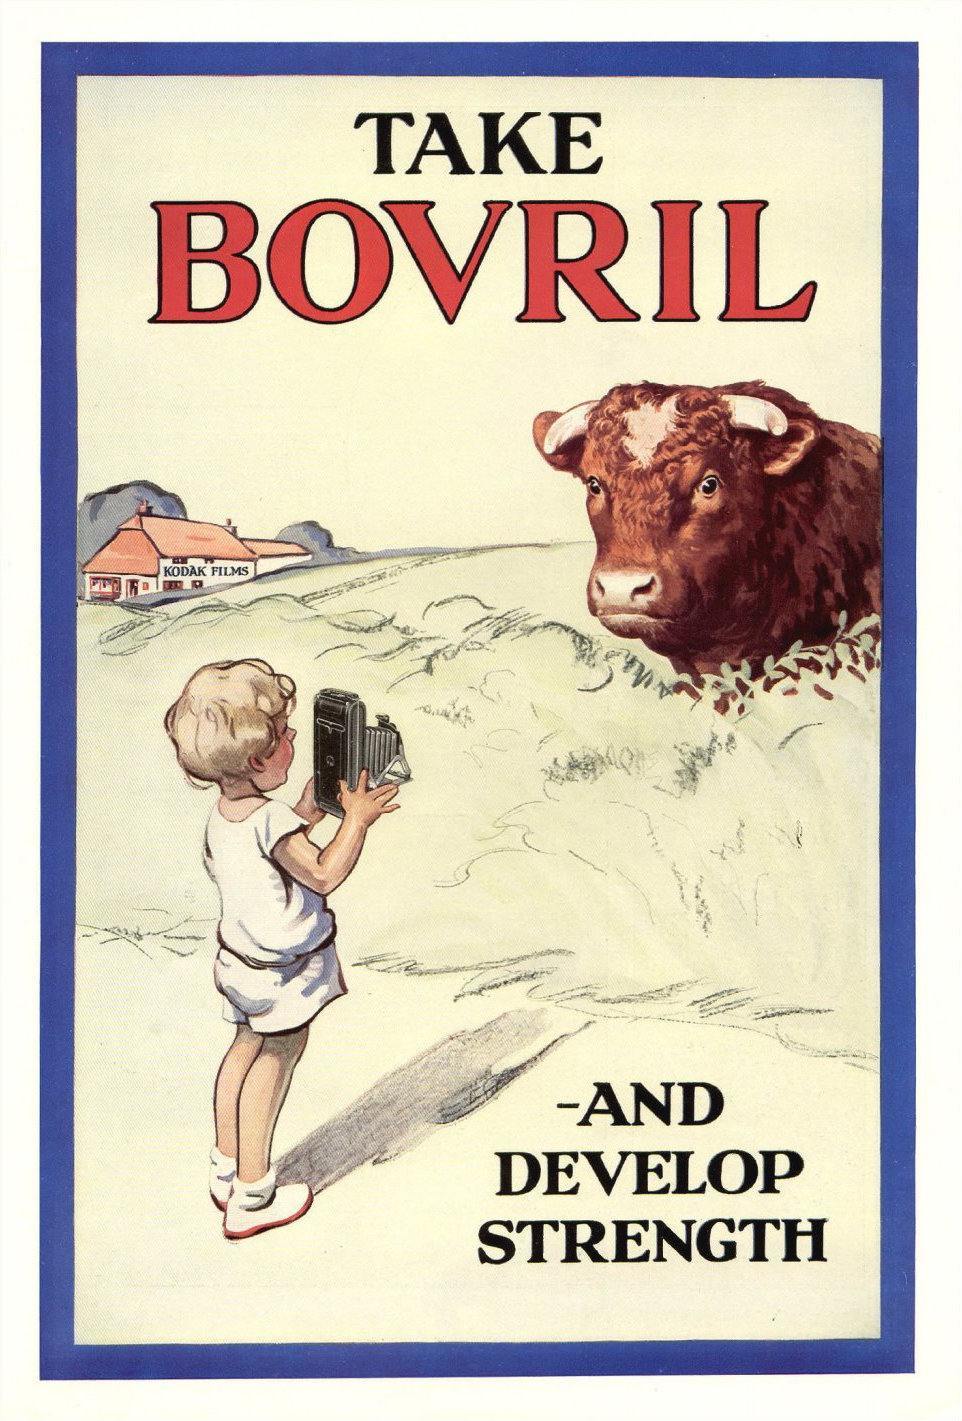 Bovril ad from 1930